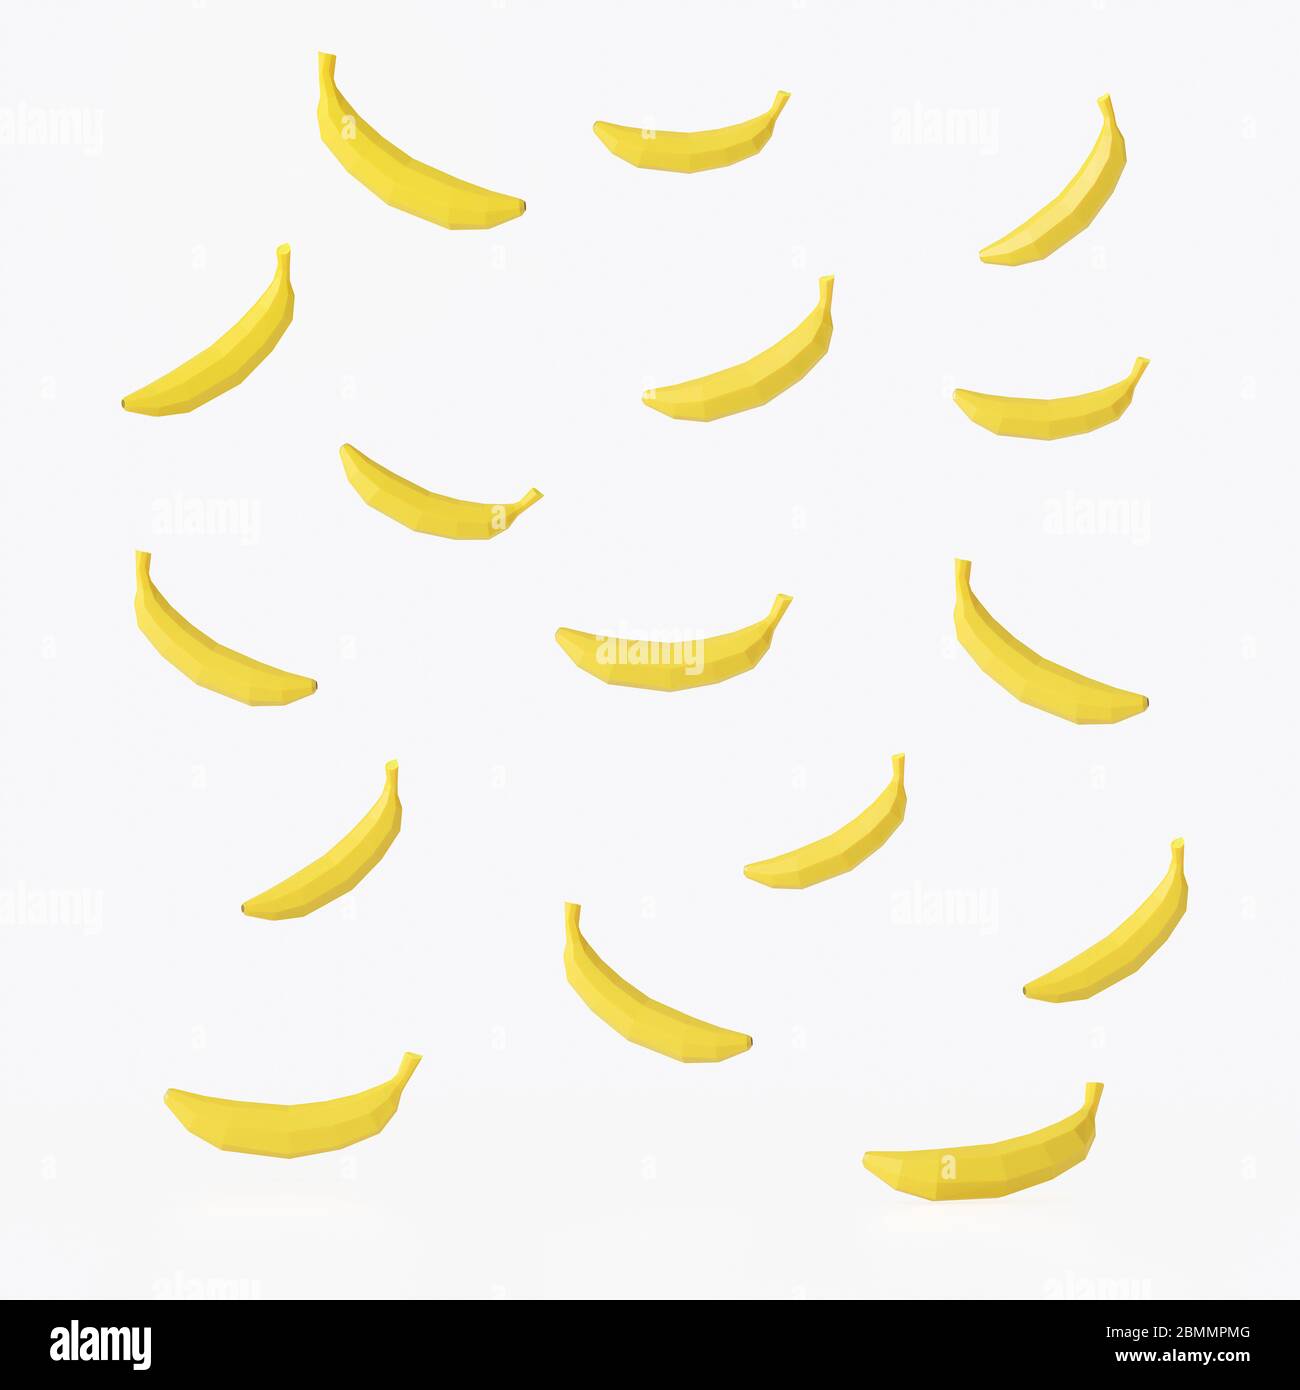 Yellow banana fruits 3d pattern illustration render with isolate on white background. Stock Photo